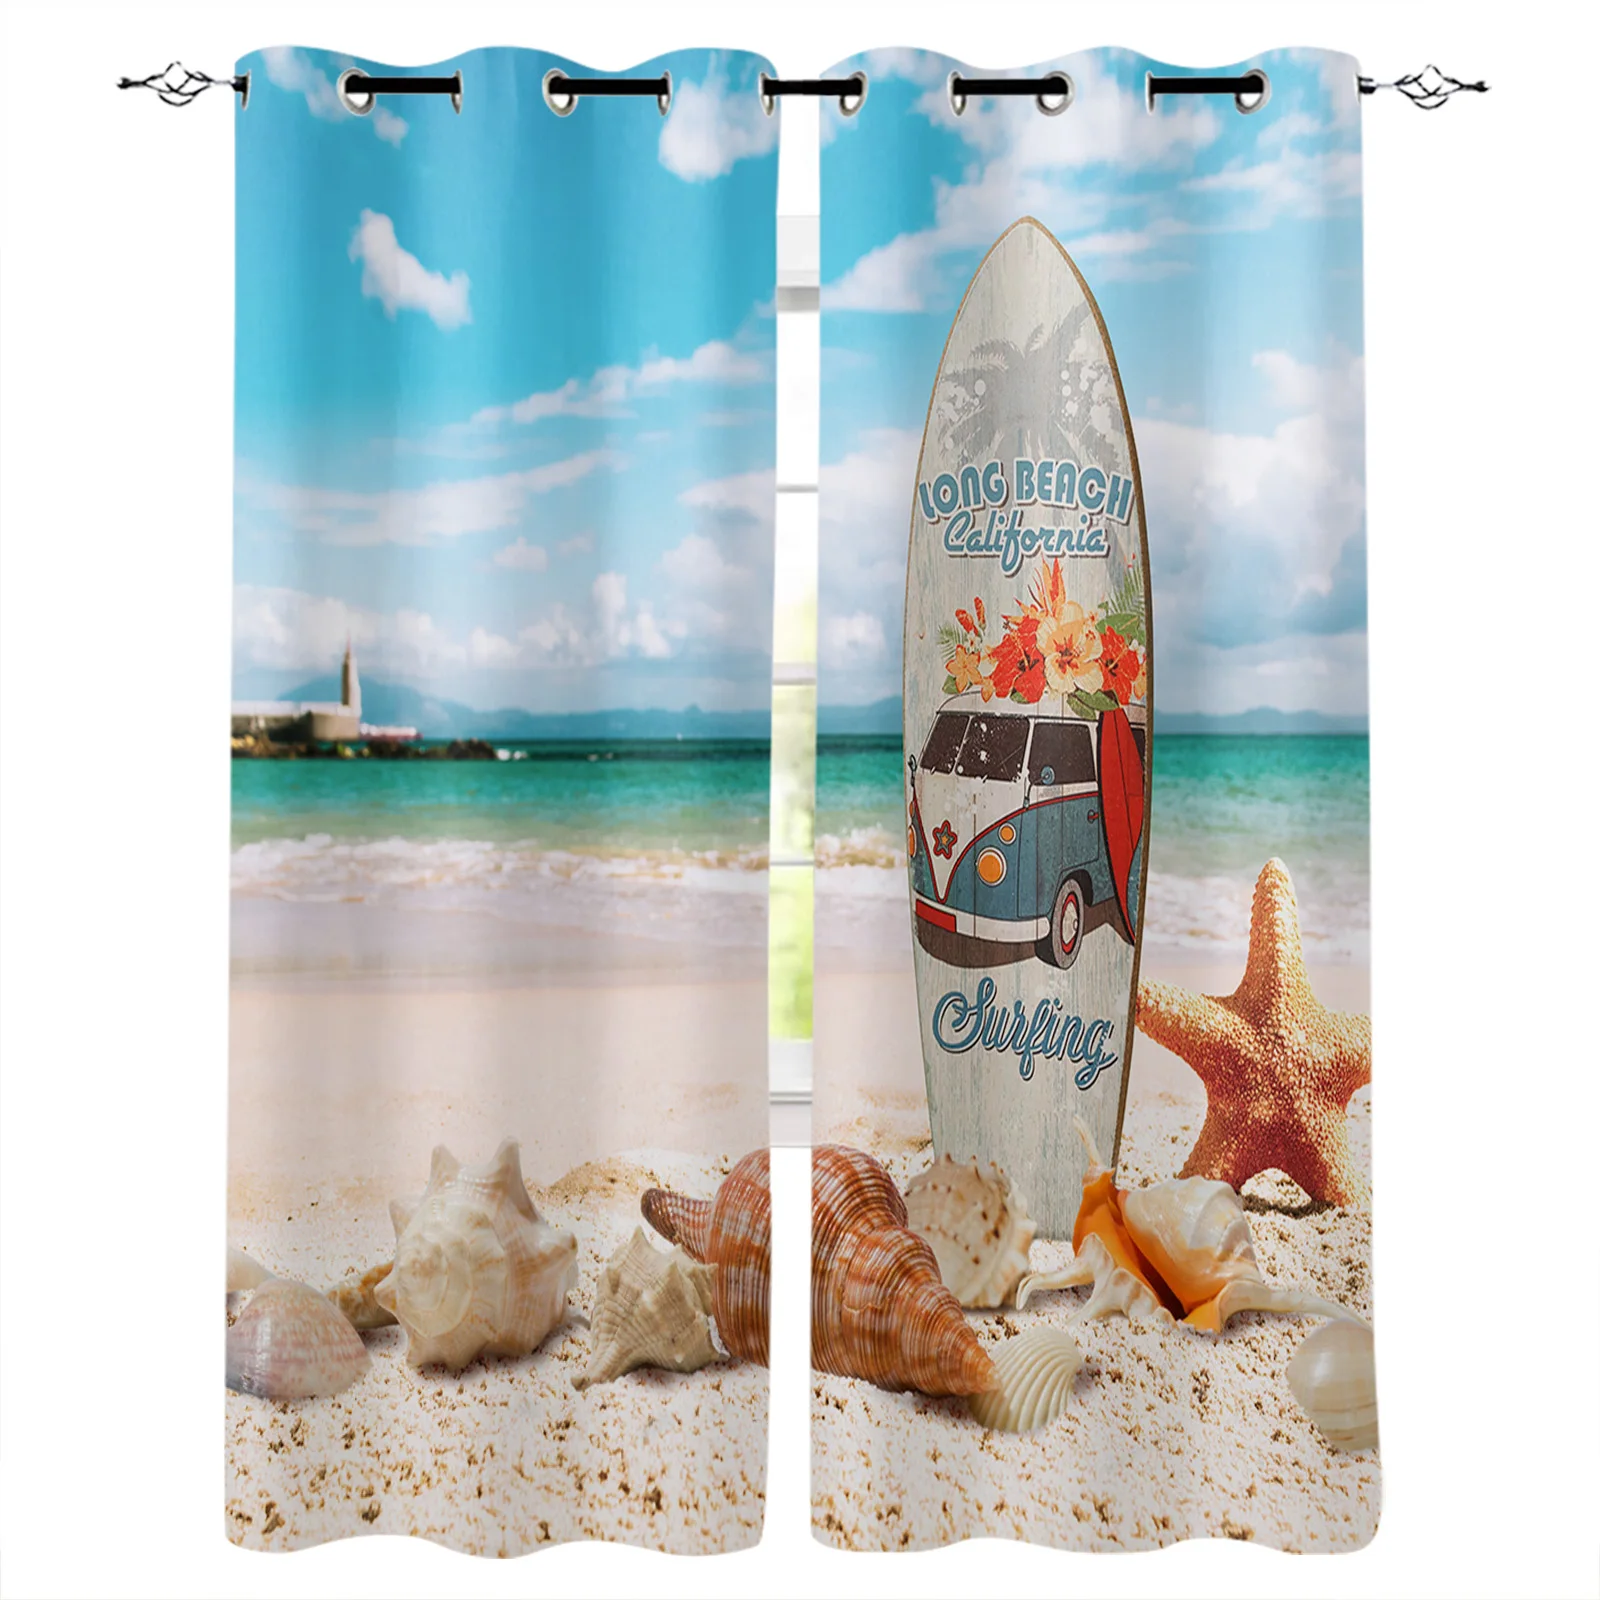 

Surfboard Beach Starfish Shell Window Curtains for Living Room Bedroom Kitchen Modern Curtains Home Decoration Drapes Blinds